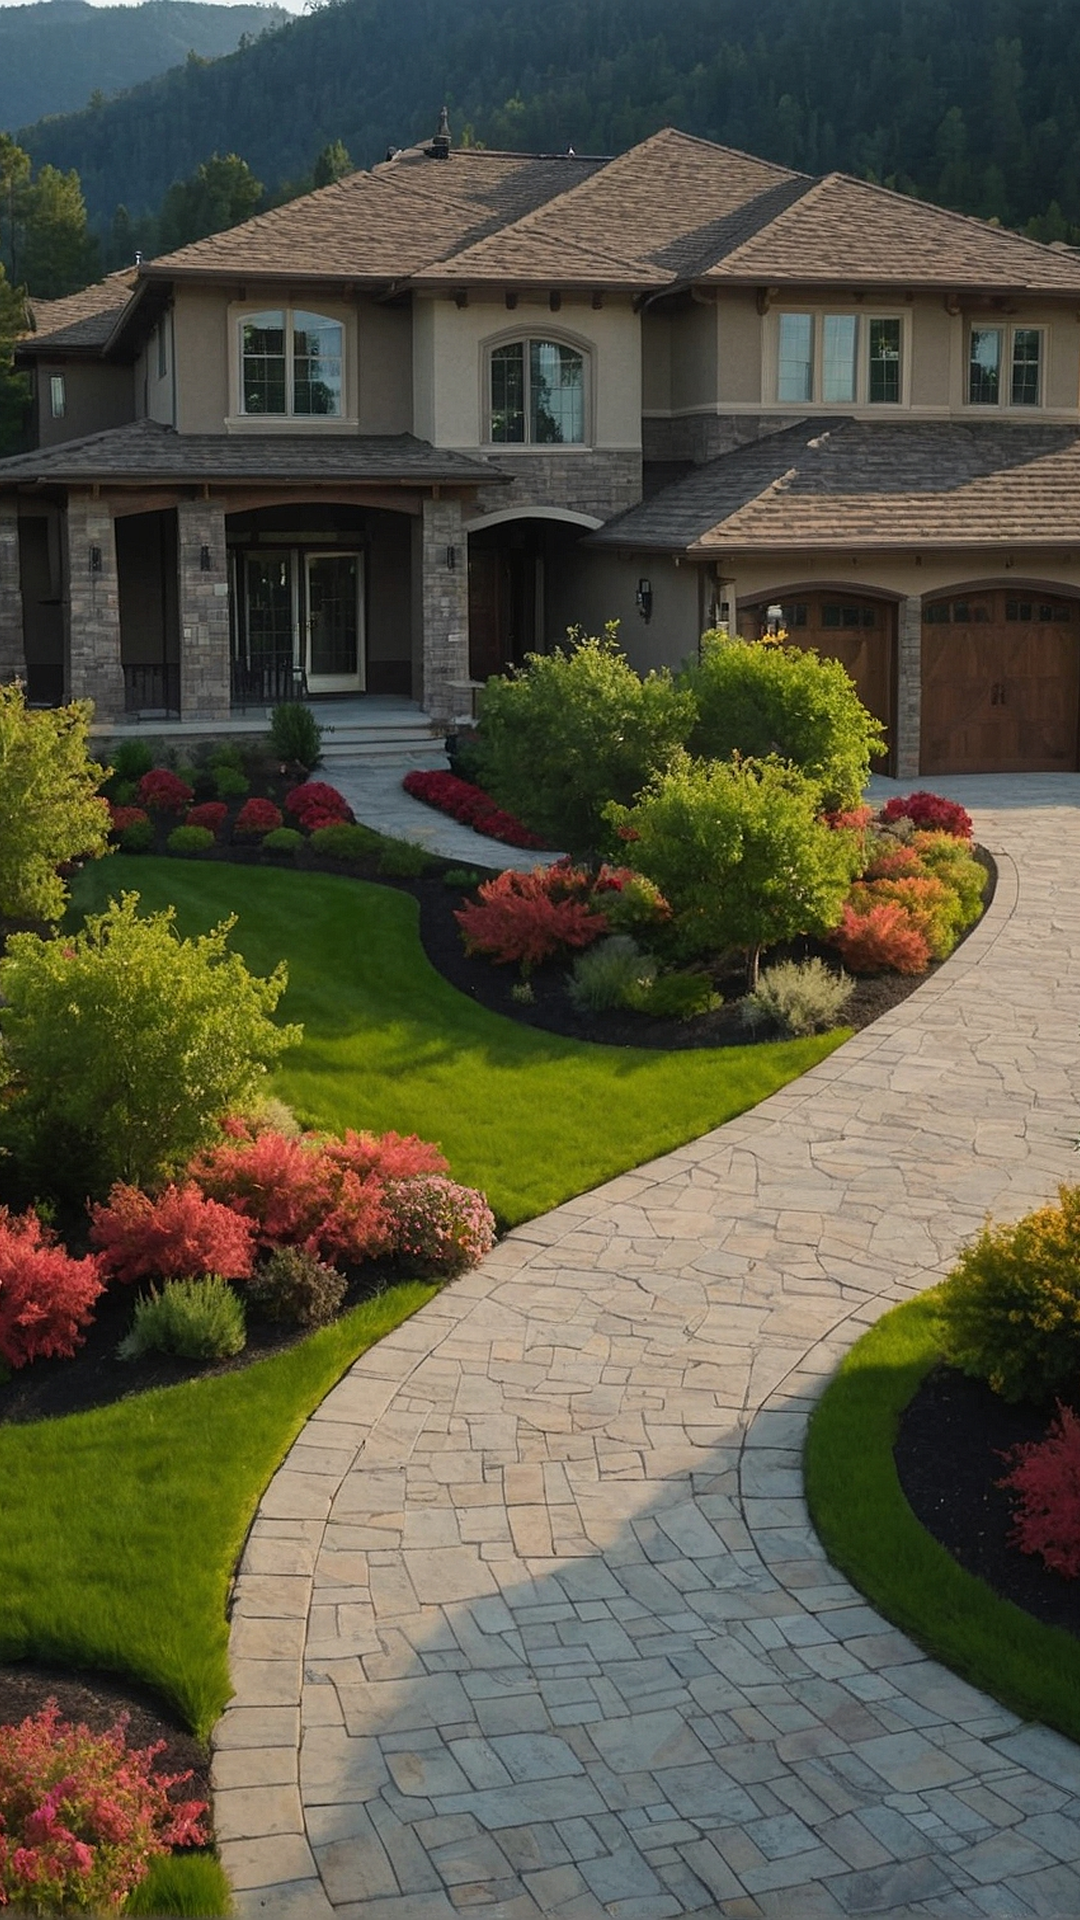 Landscaping Visions: Gravel Driveway Entry Design Ideas